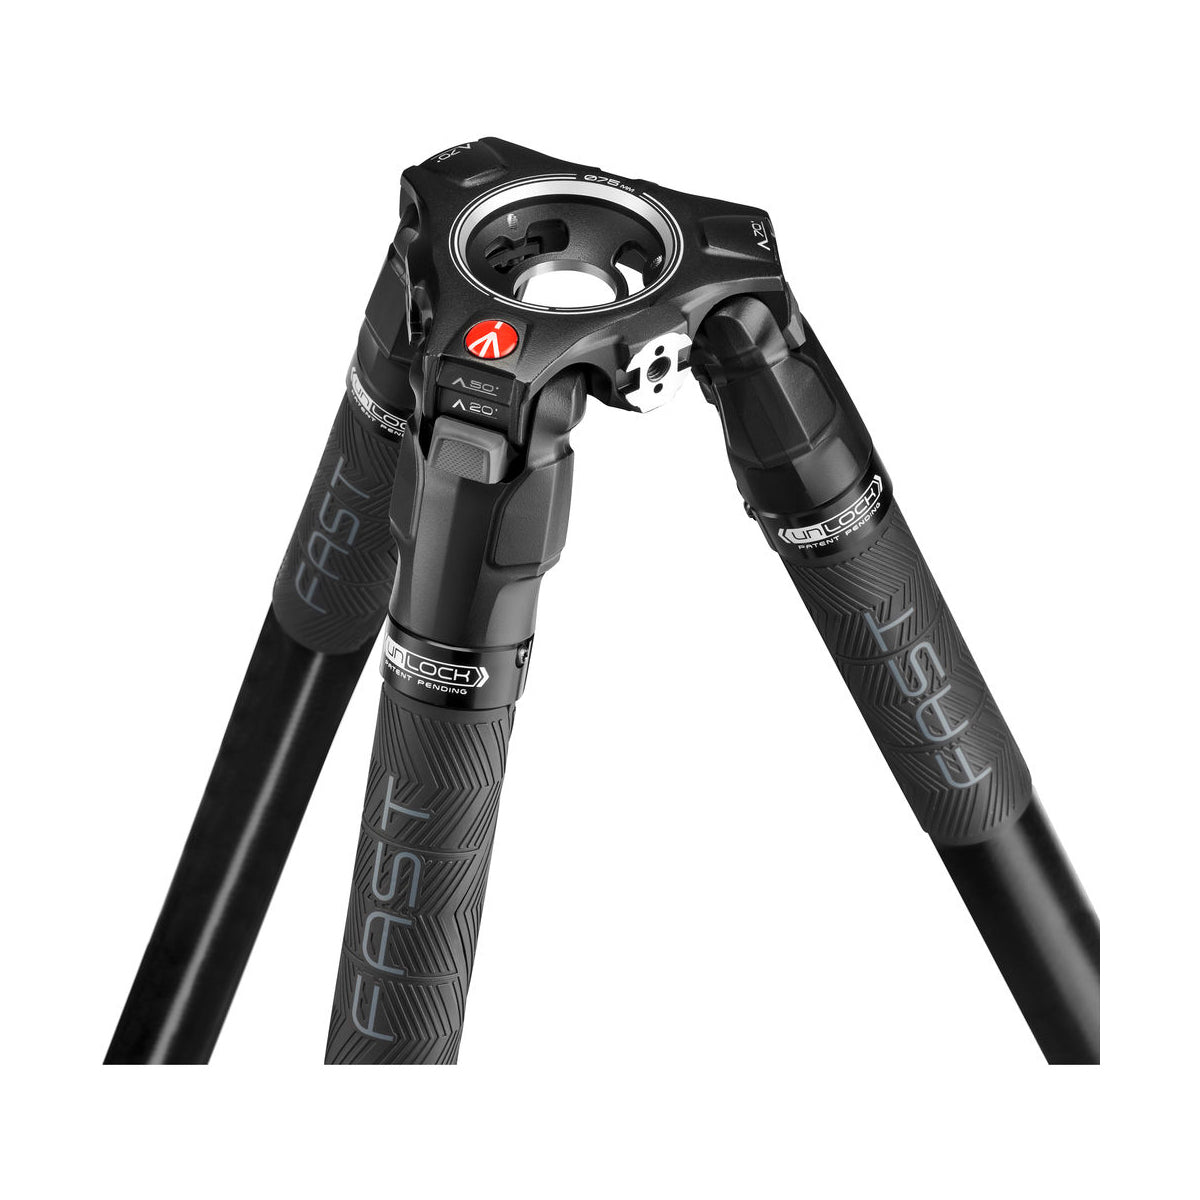 Manfrotto MVK608SNGFCUS Kit with Nitrotech 608 Fluid Head and 635 Fast Single Leg Carbon Fiber Tripod & Bag